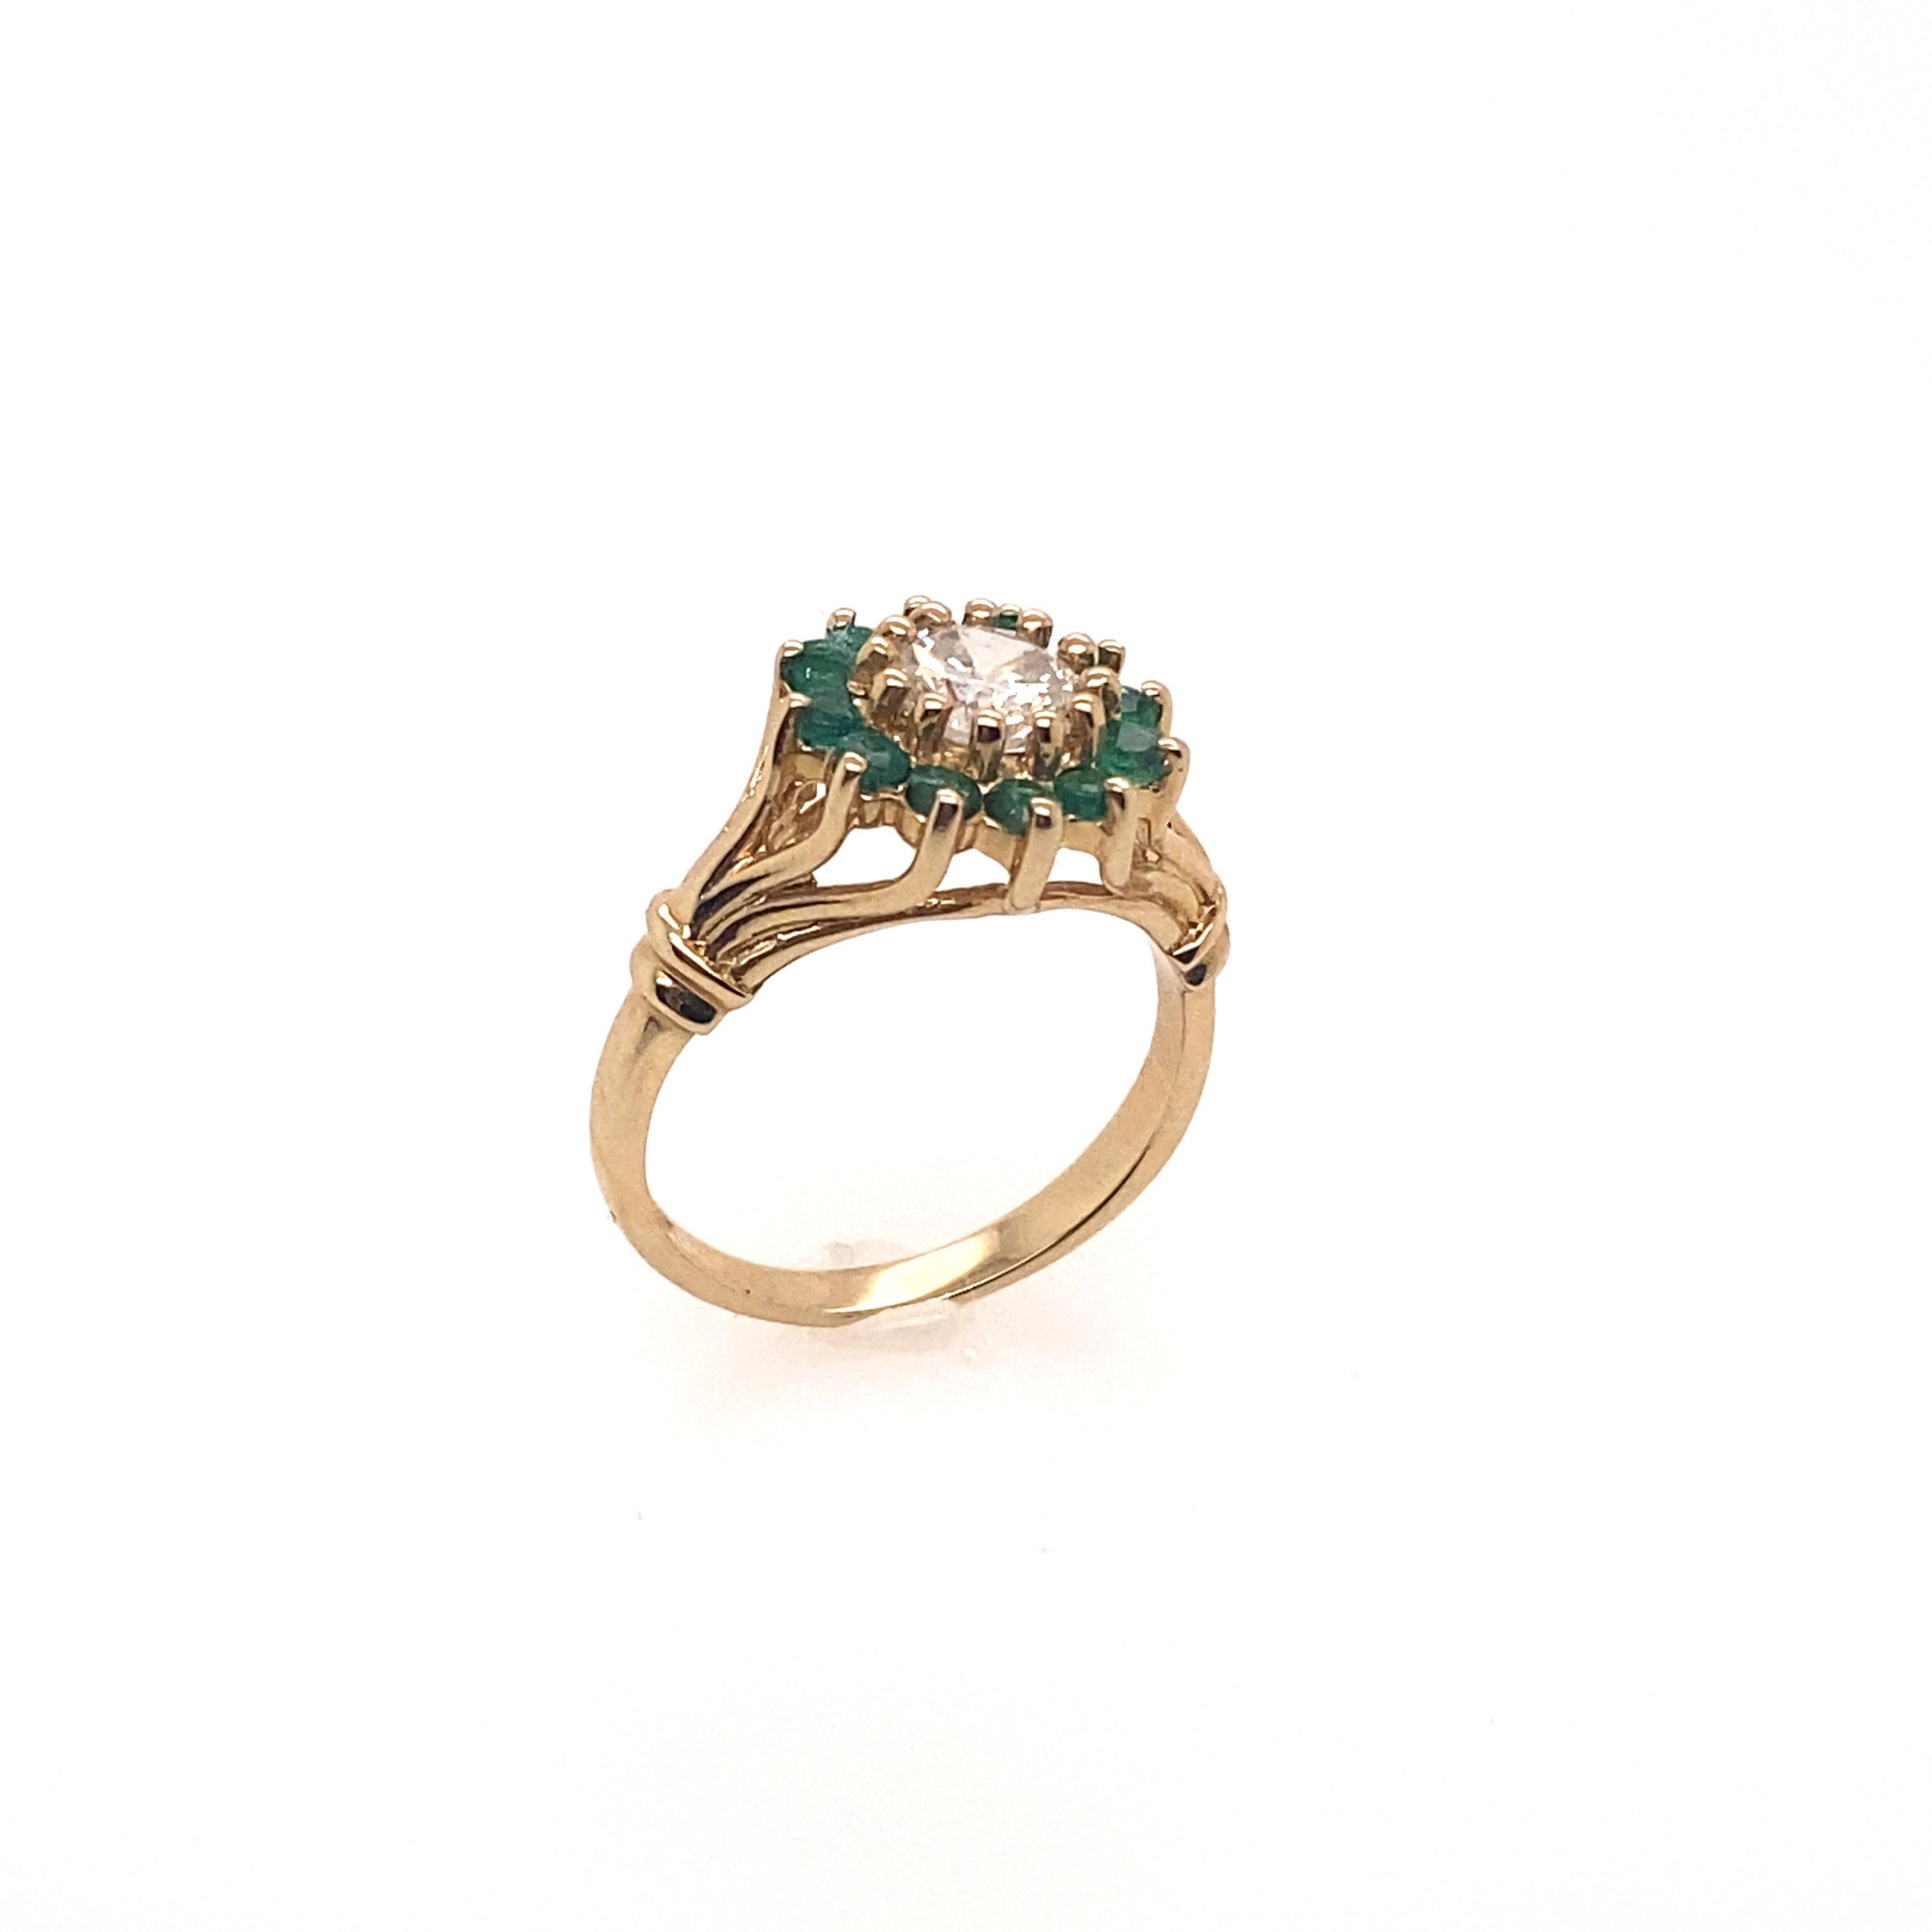 The center diamond 0.60 carat brilliant round set in the 14K yellow gold ring featured by a cluster design and surrounded by twelve round cut emerald. This ring features a very fashionable look and can be worn in everyday. 

Center Diamond Weight: